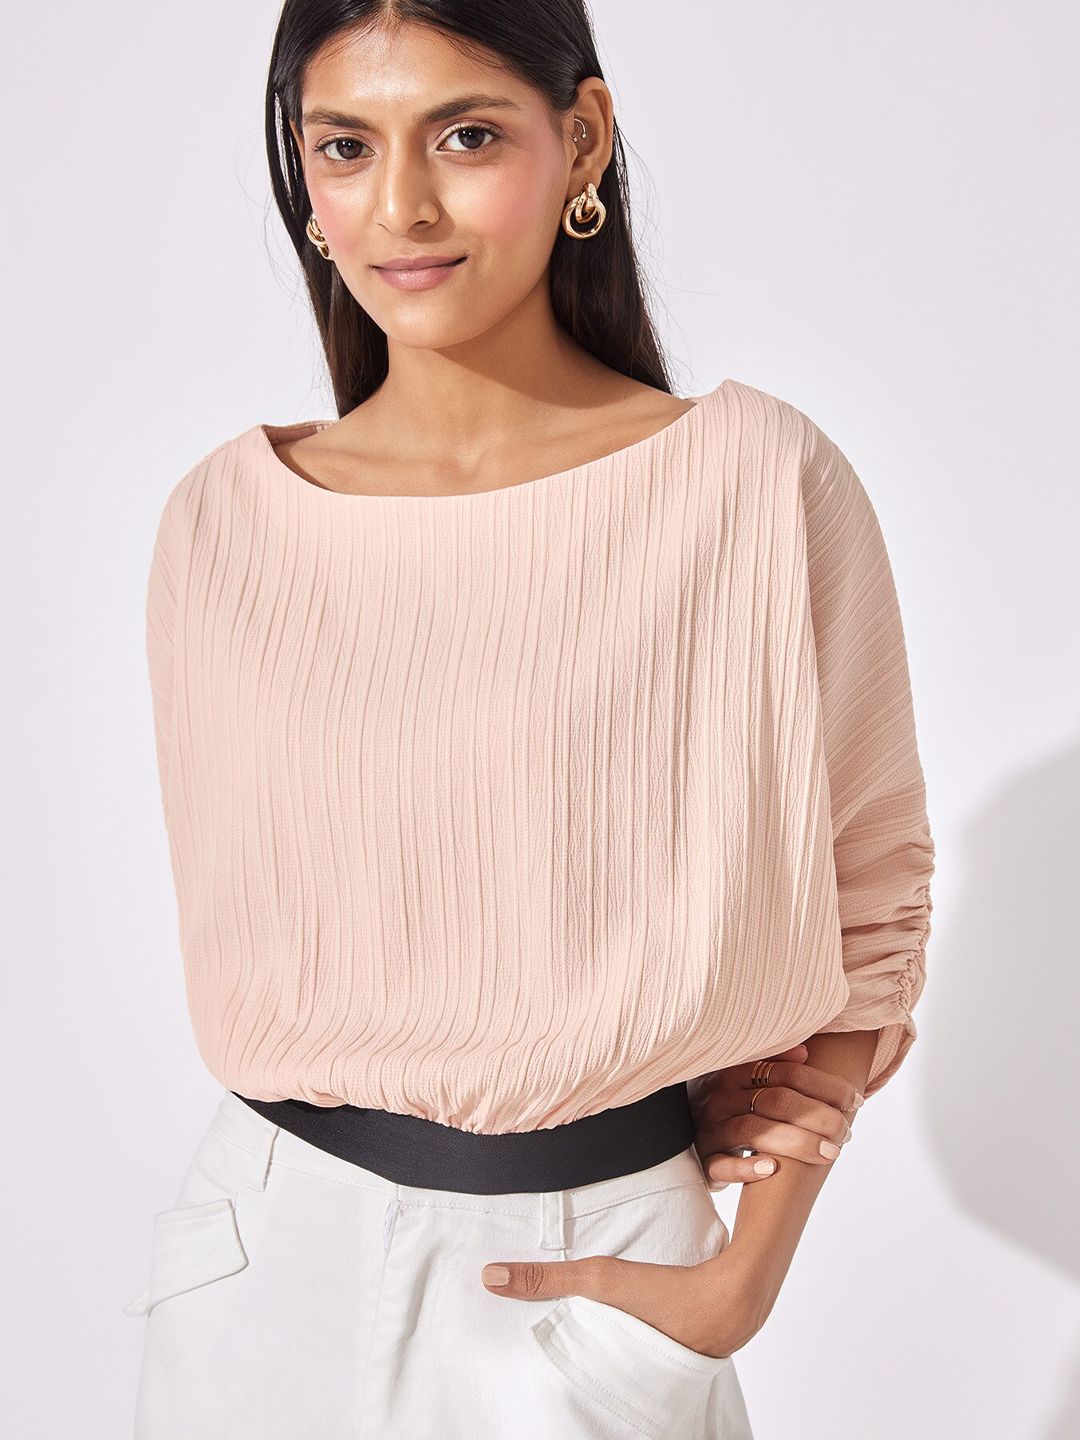 The Label Life Pink Boat Neck Crepe Blouson Top Price in India